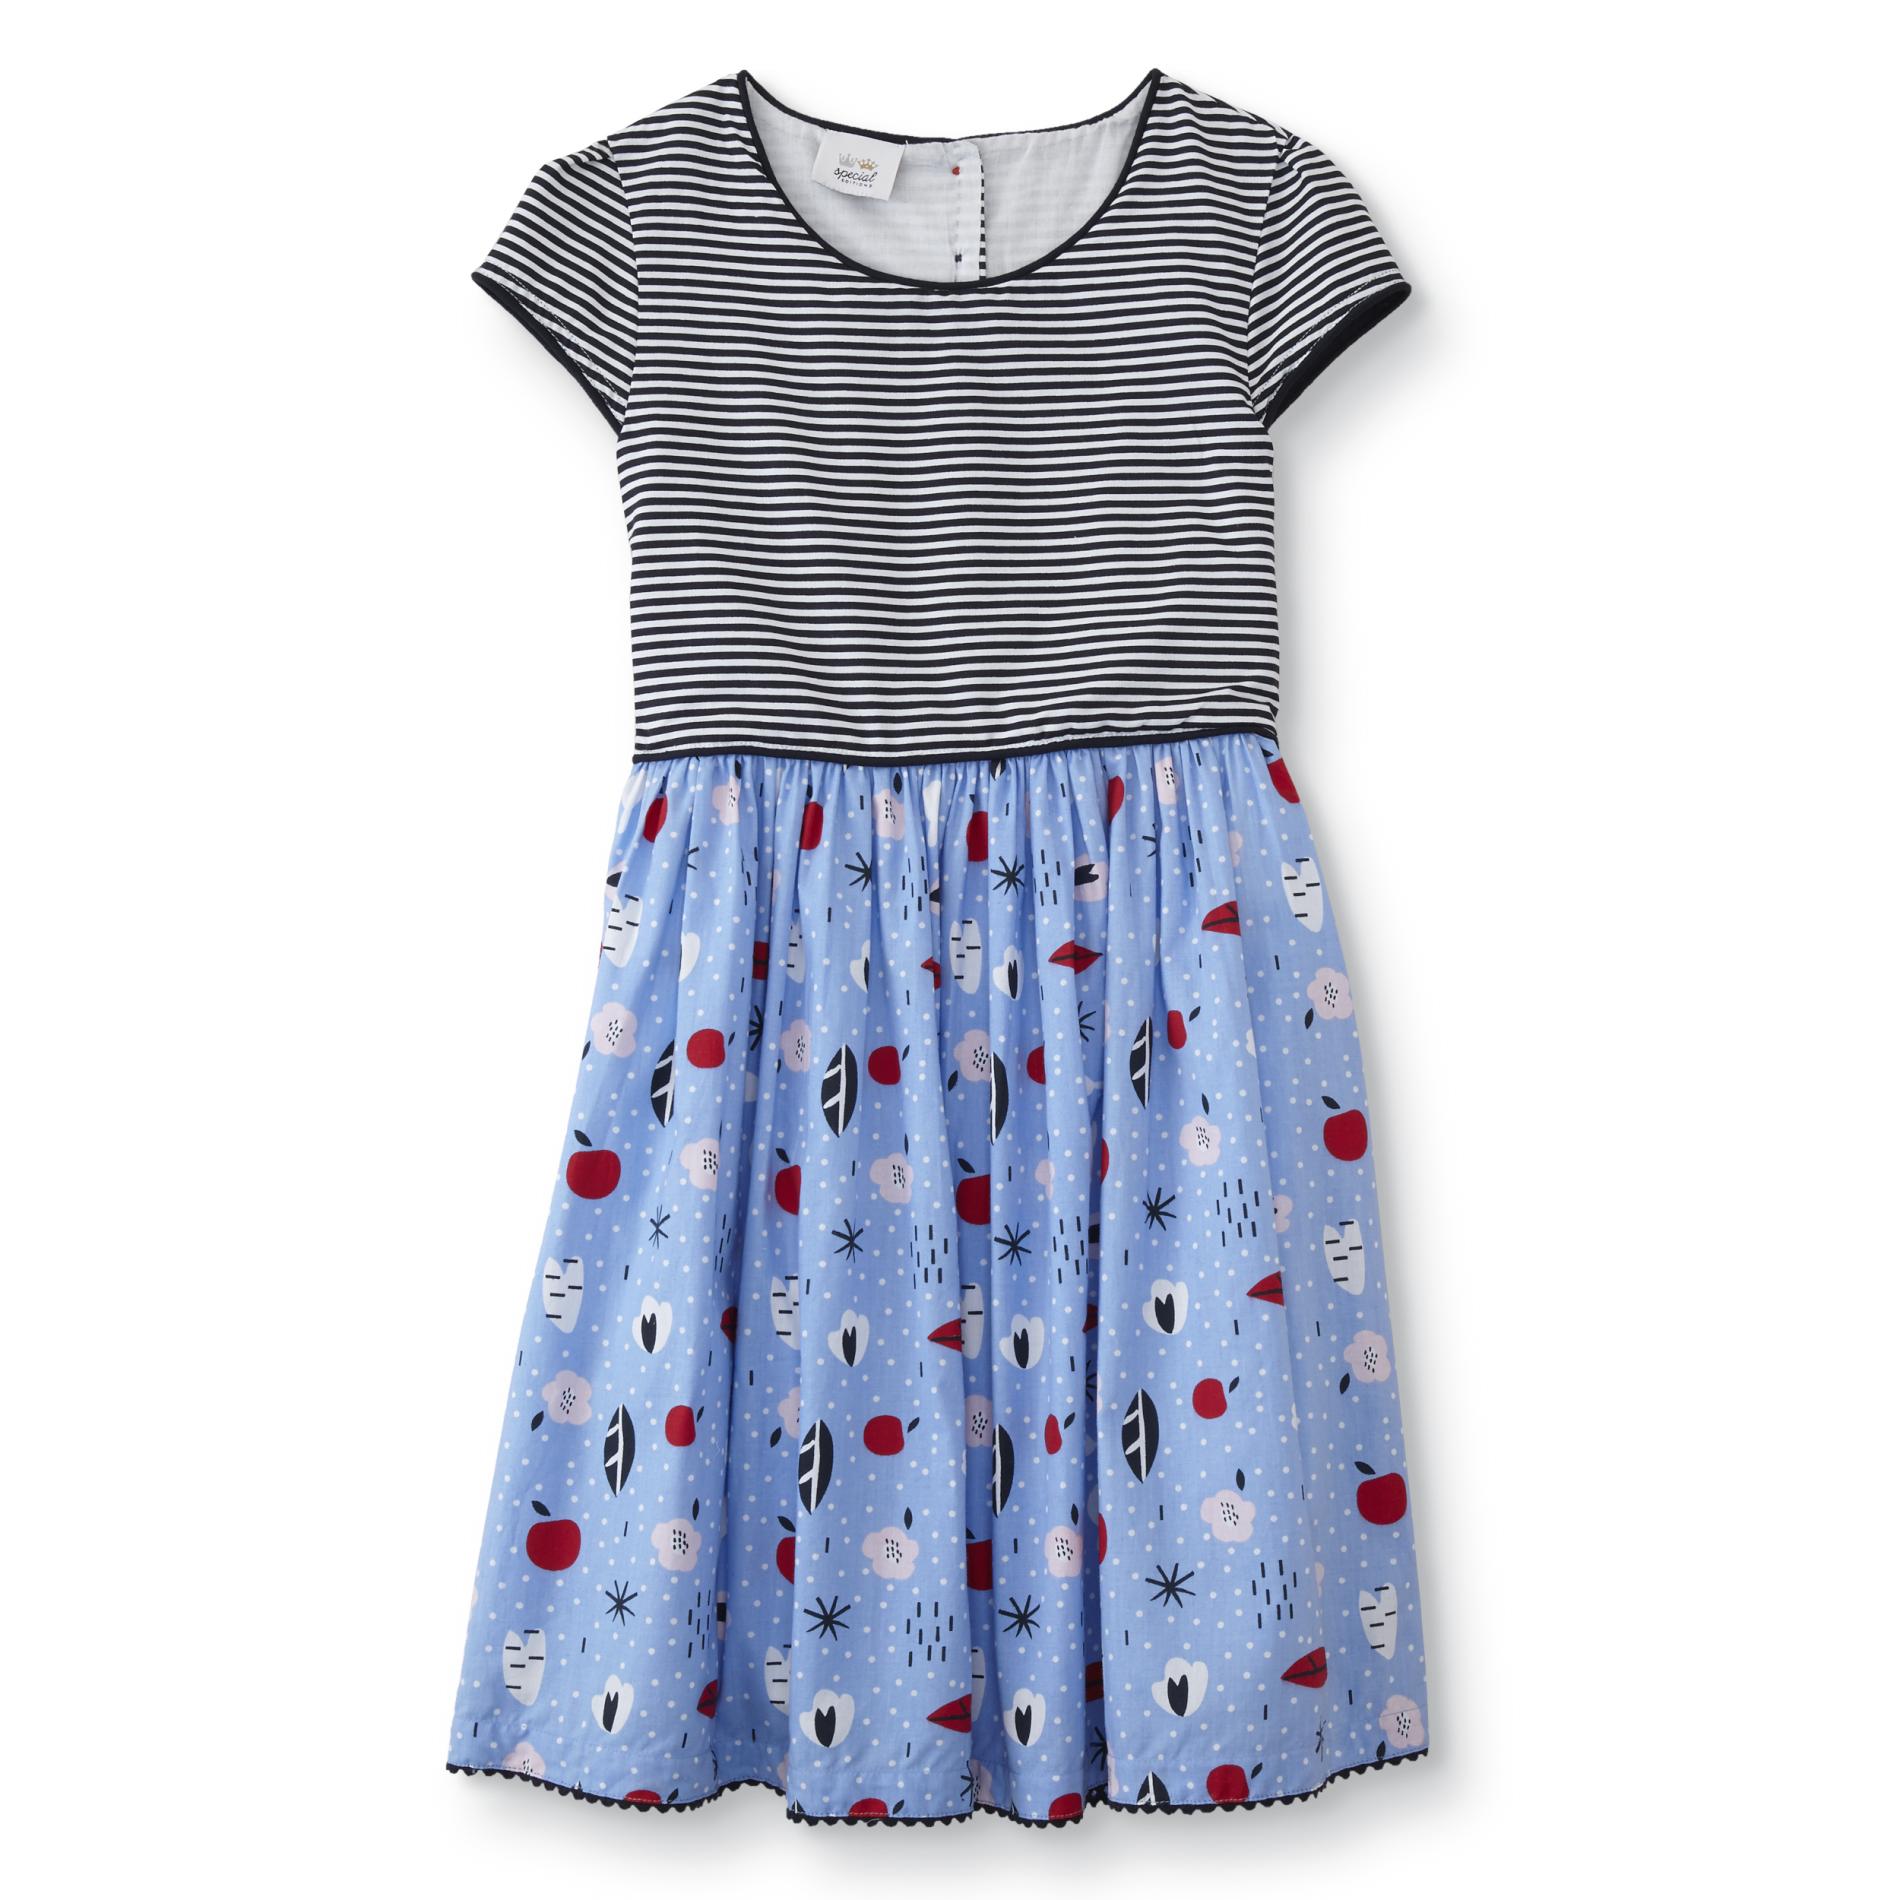 Special Editions Girls' Dress - Striped & Leaf